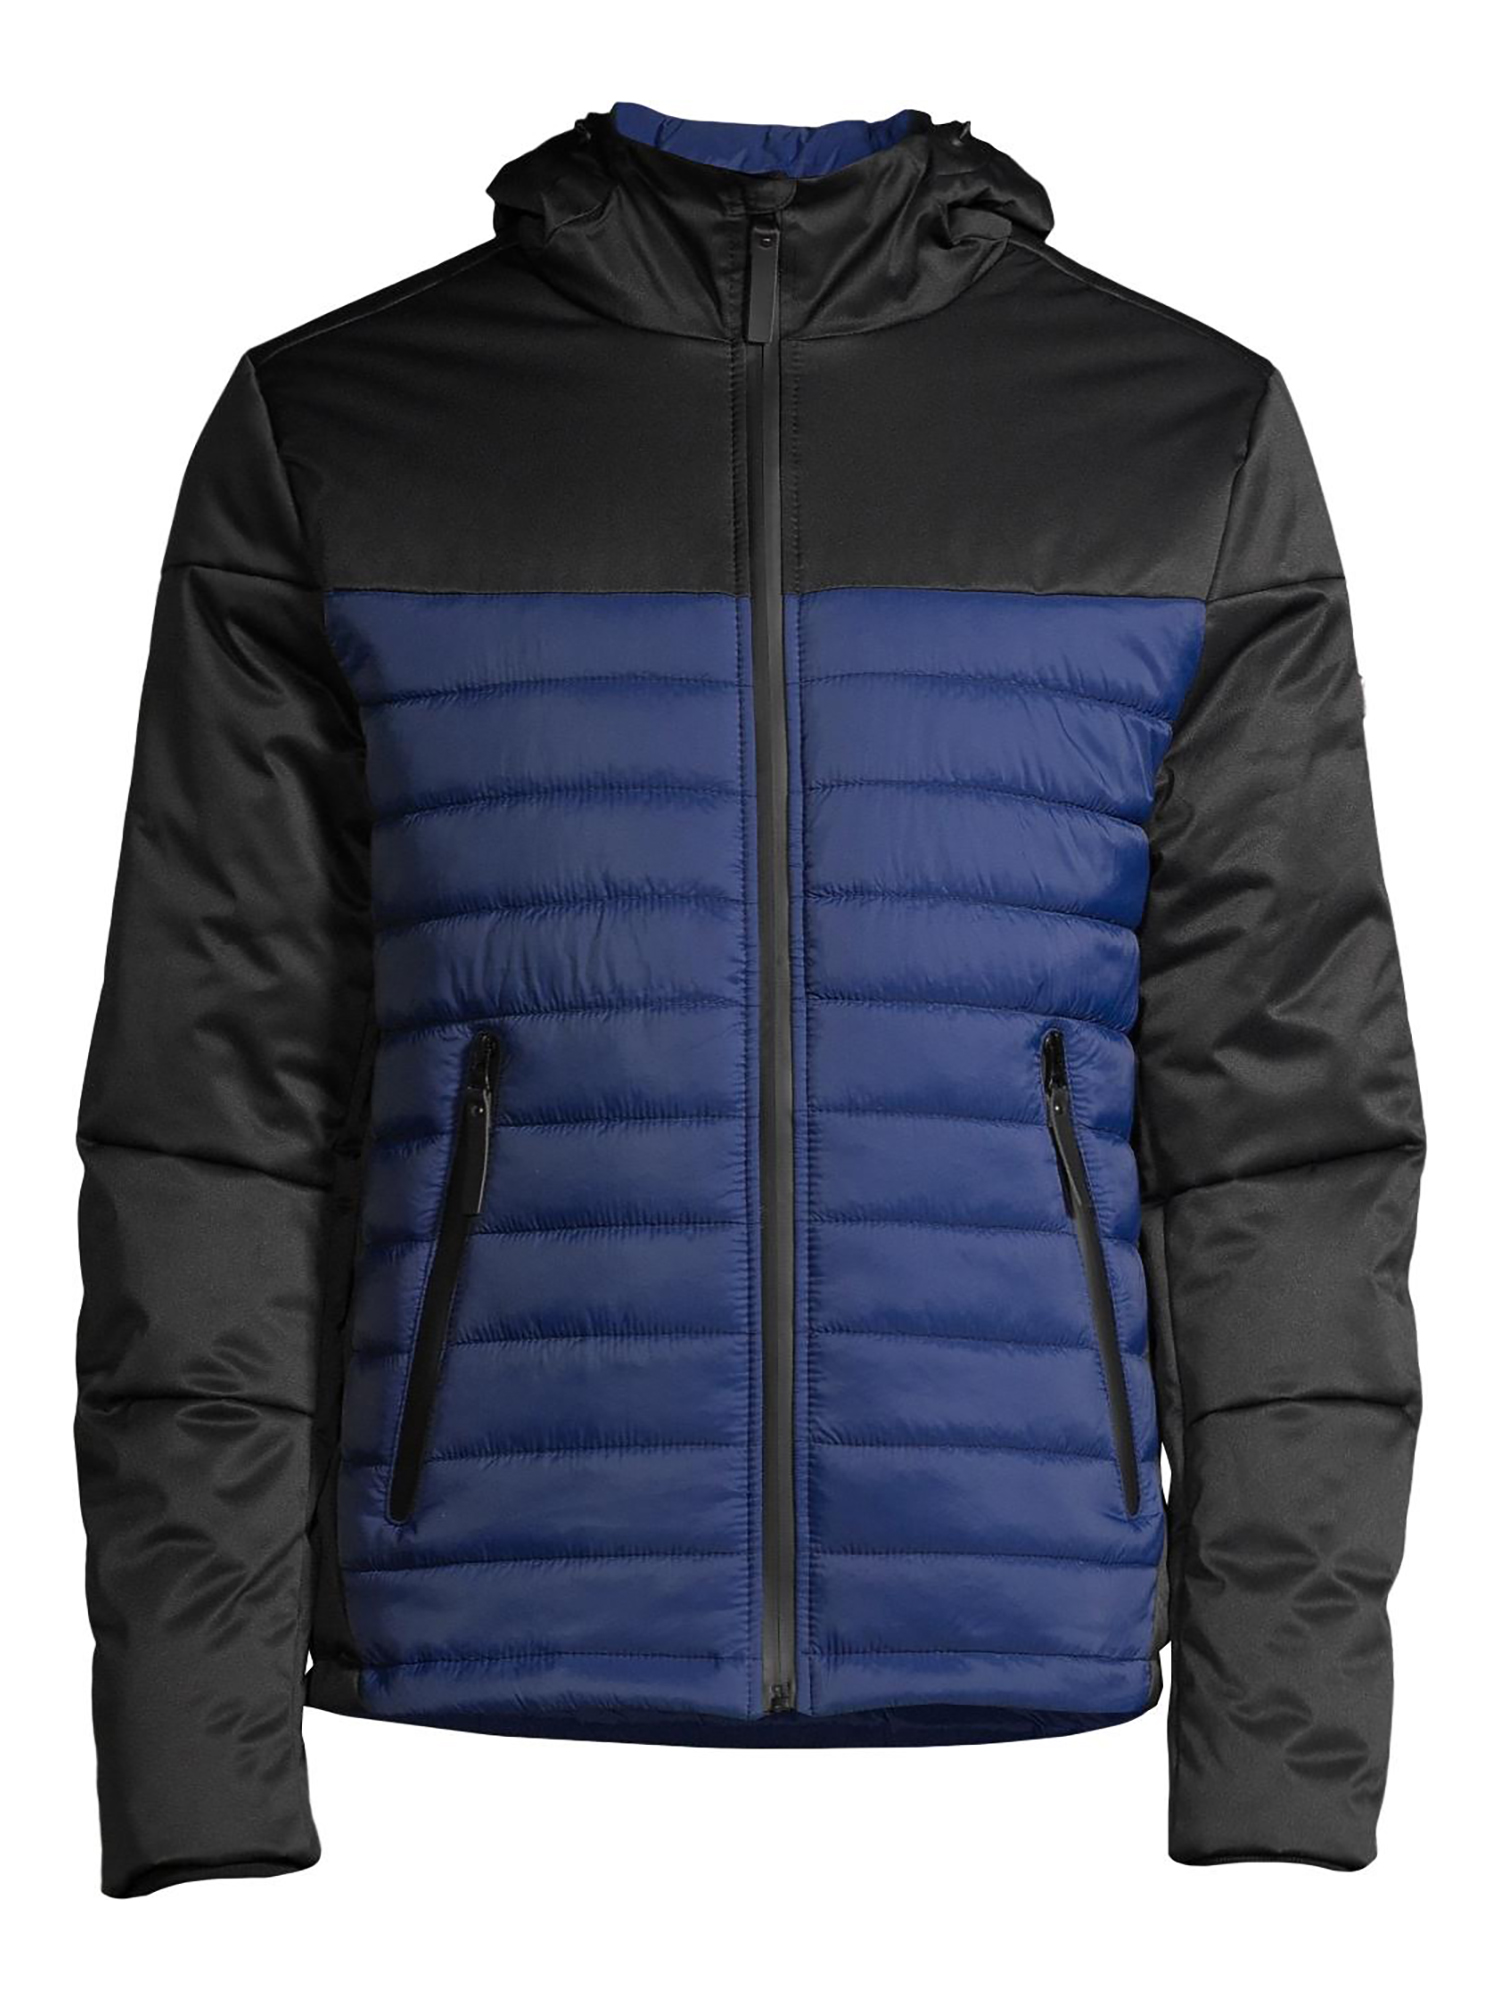 Swiss Tech Men's Hooded Softshell Quilted Mixed Media Jacket - image 7 of 7